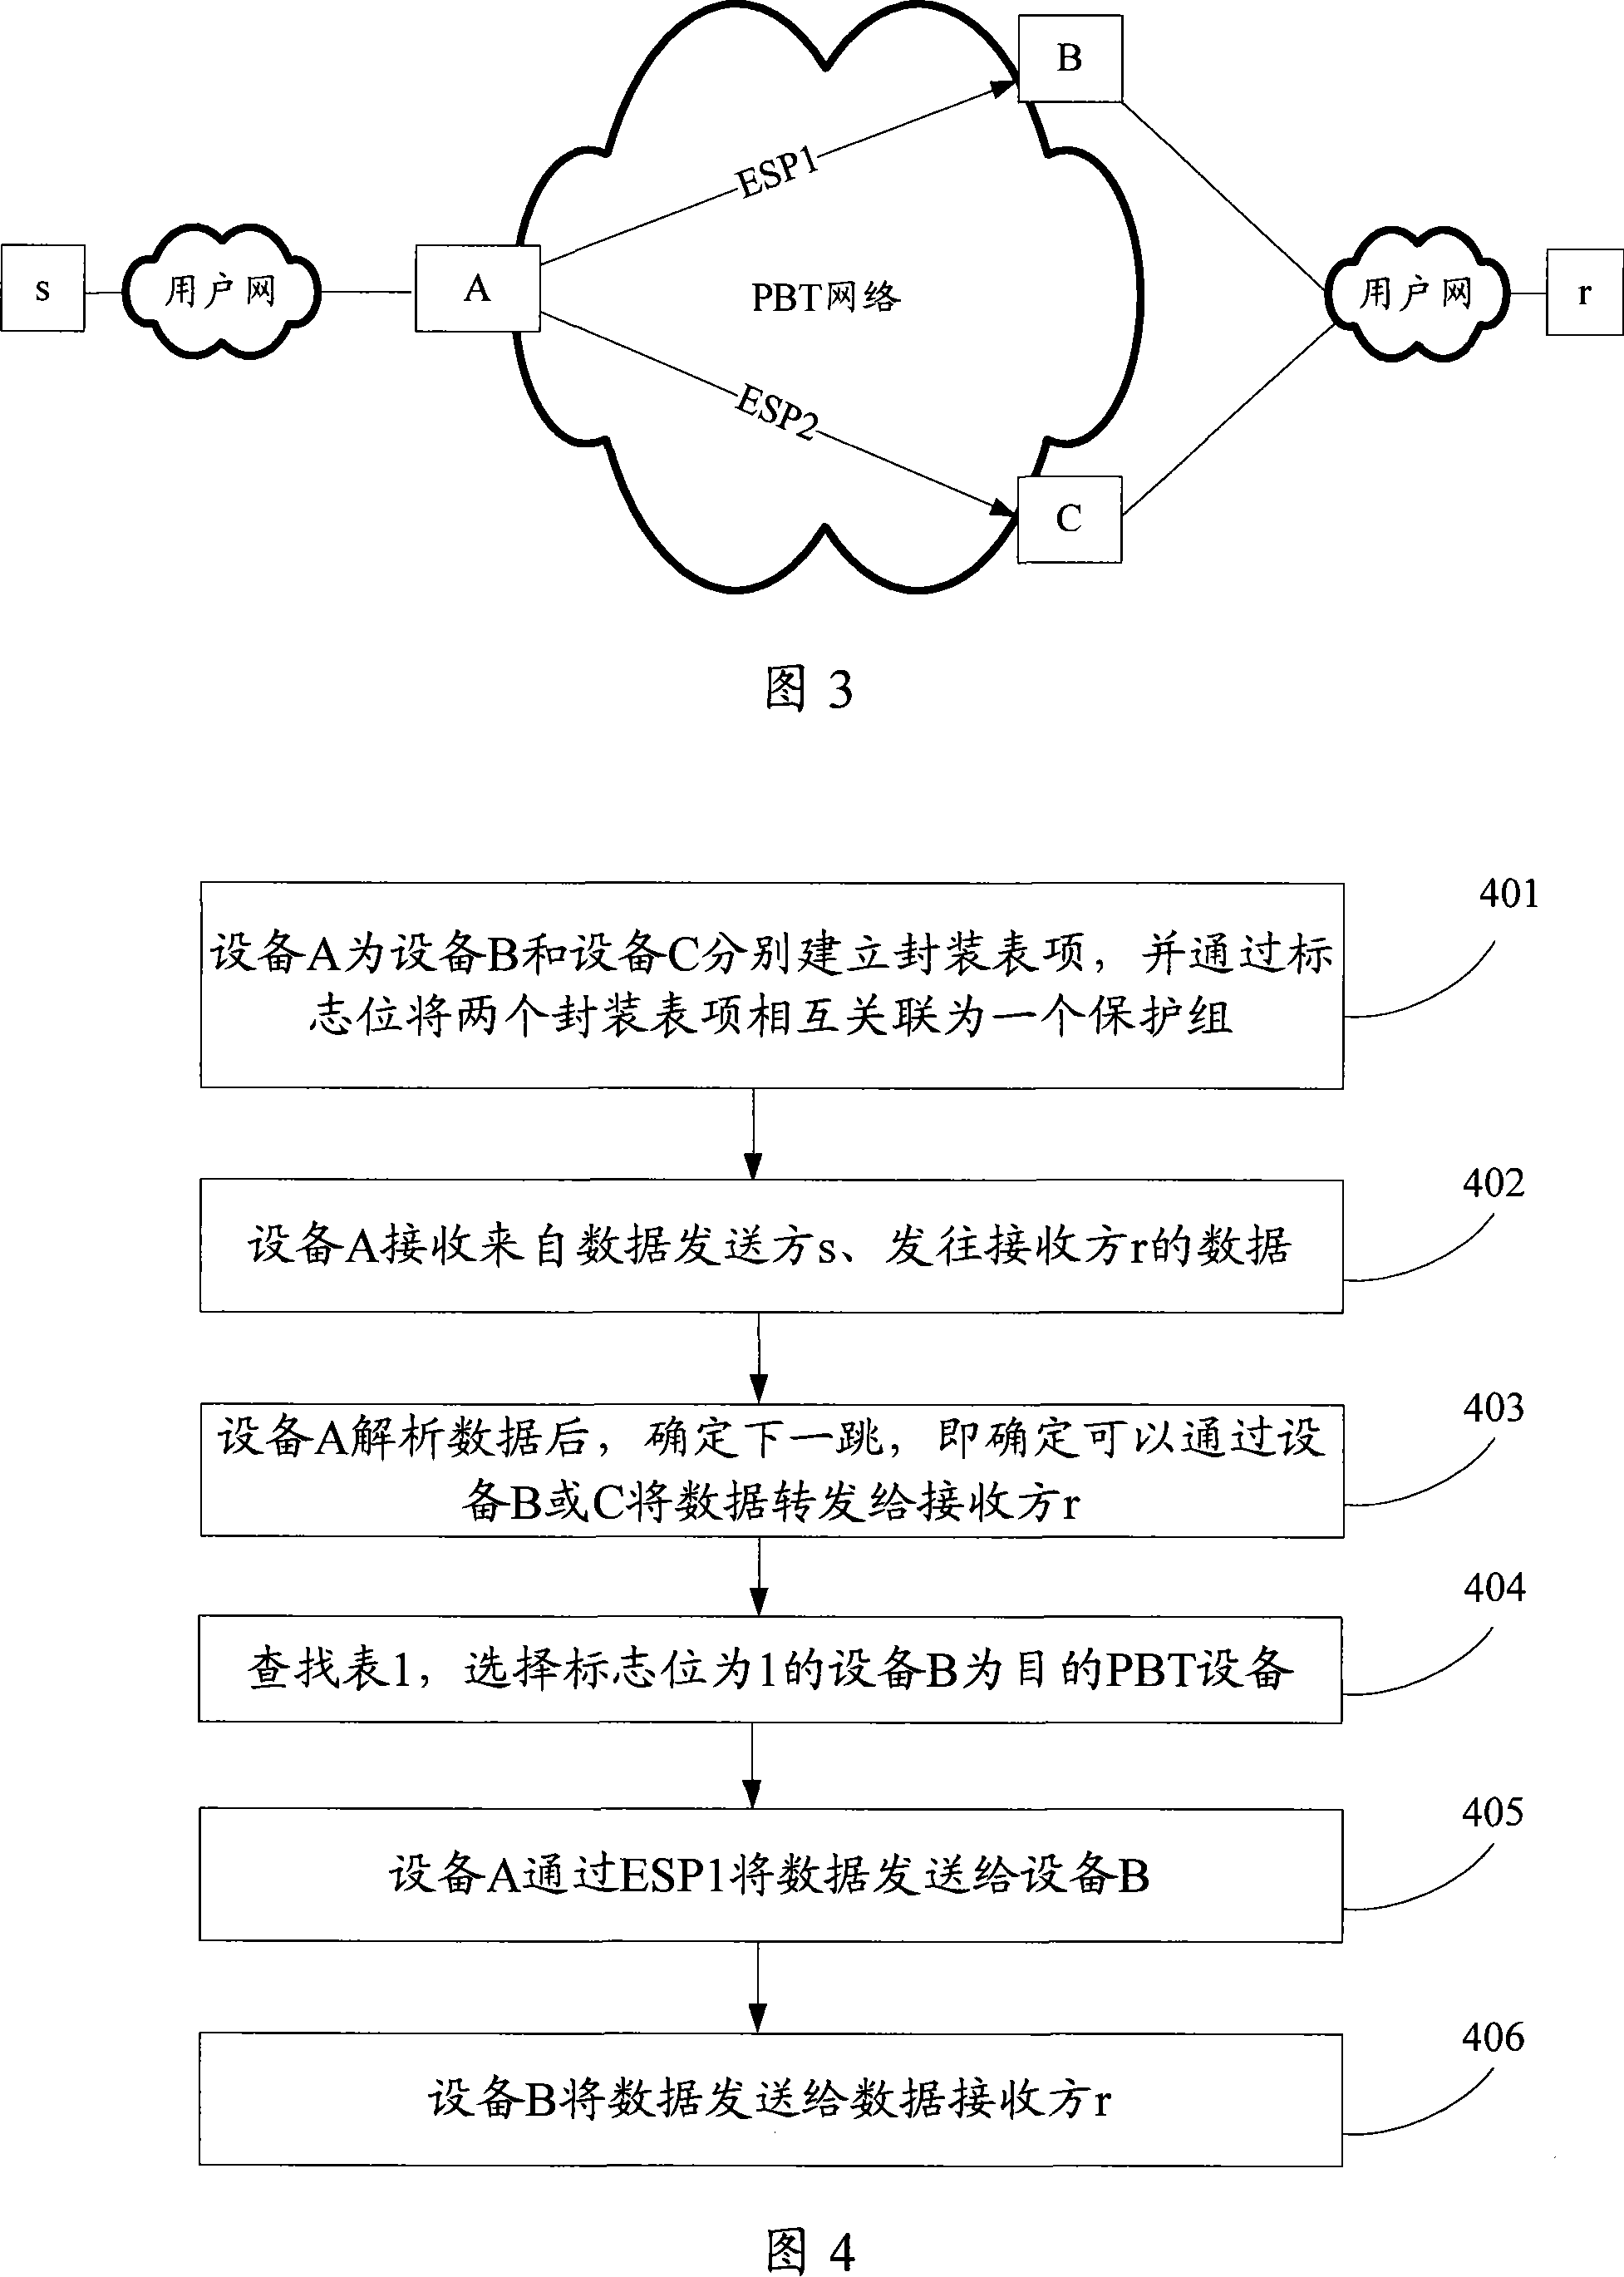 PBT network flow control method and apparatus